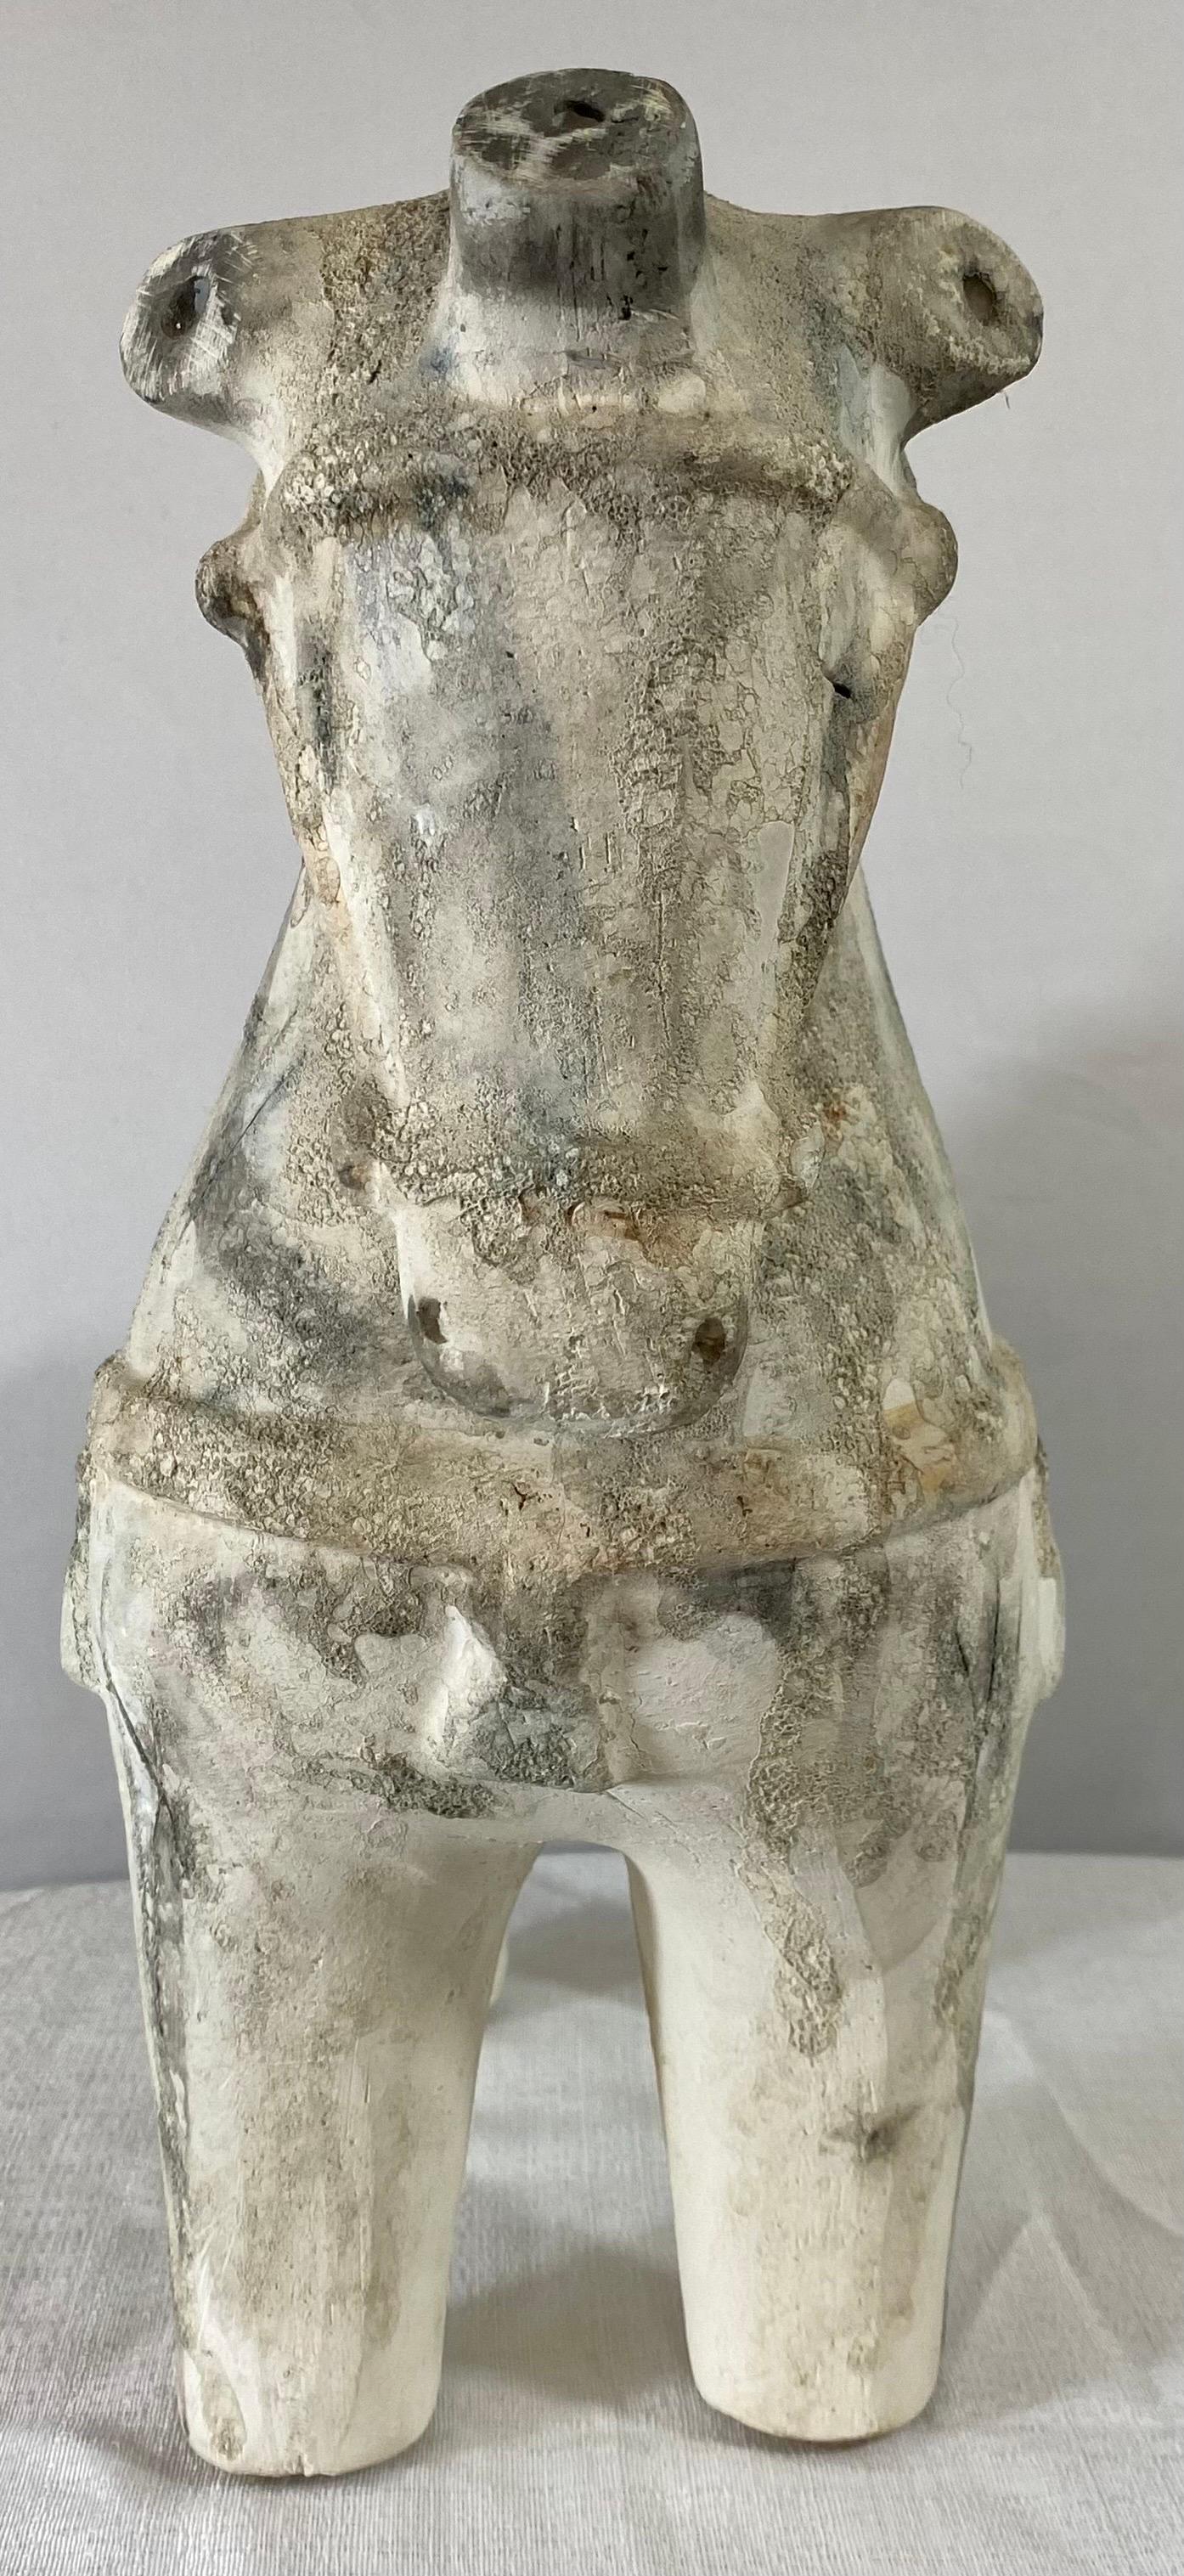 A charming Tang style pottery horse sculpture. The subculture is well crafted and shows beautiful patterns and design on the surface with gray coloration on the off white color as well as a hanging saddle.  

Dimensions: 16” H x 16” W x 8” D